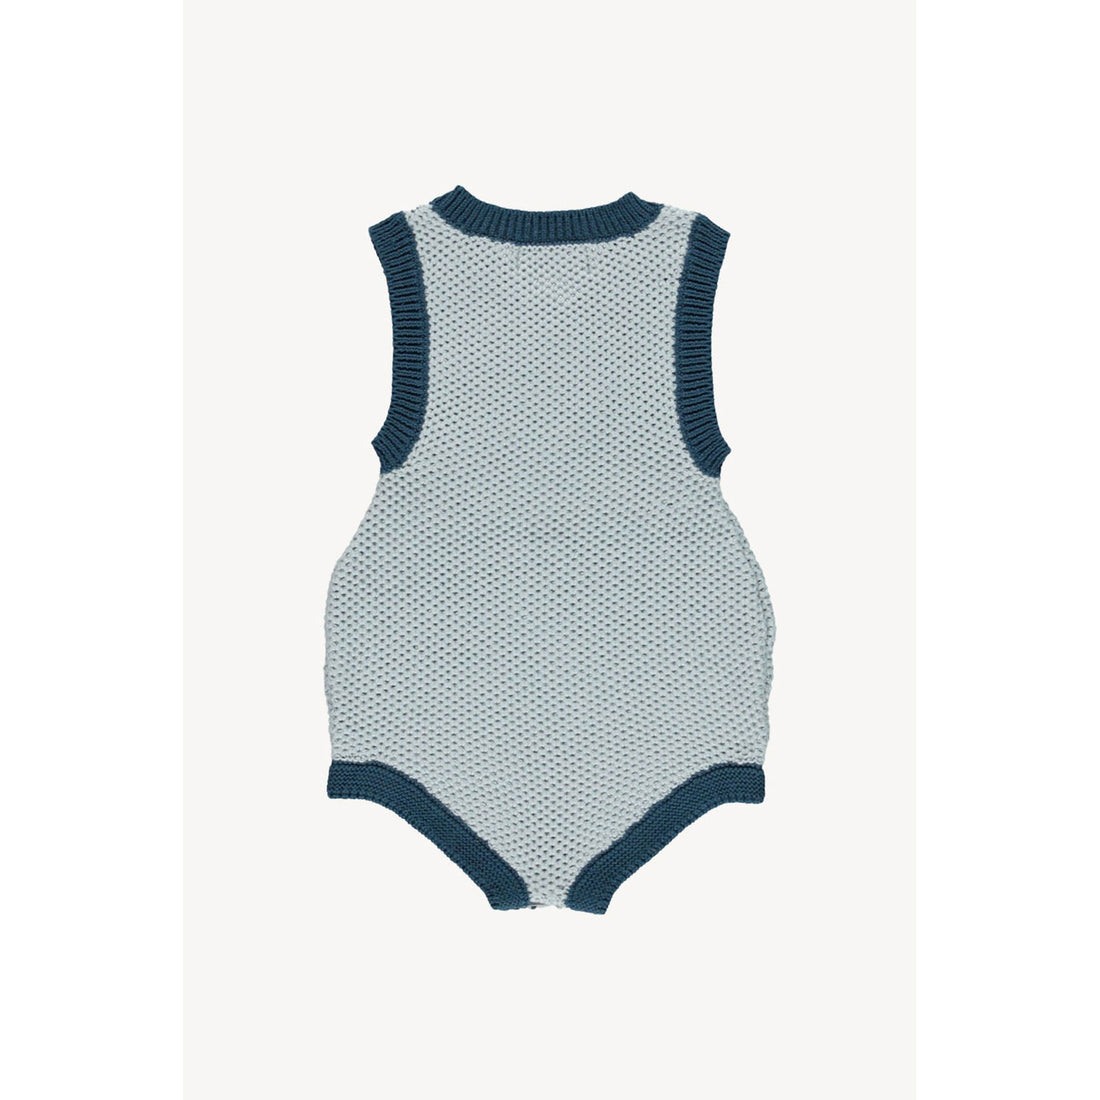 Fin and Vince Sky/Ocean Knit Wrap Romper